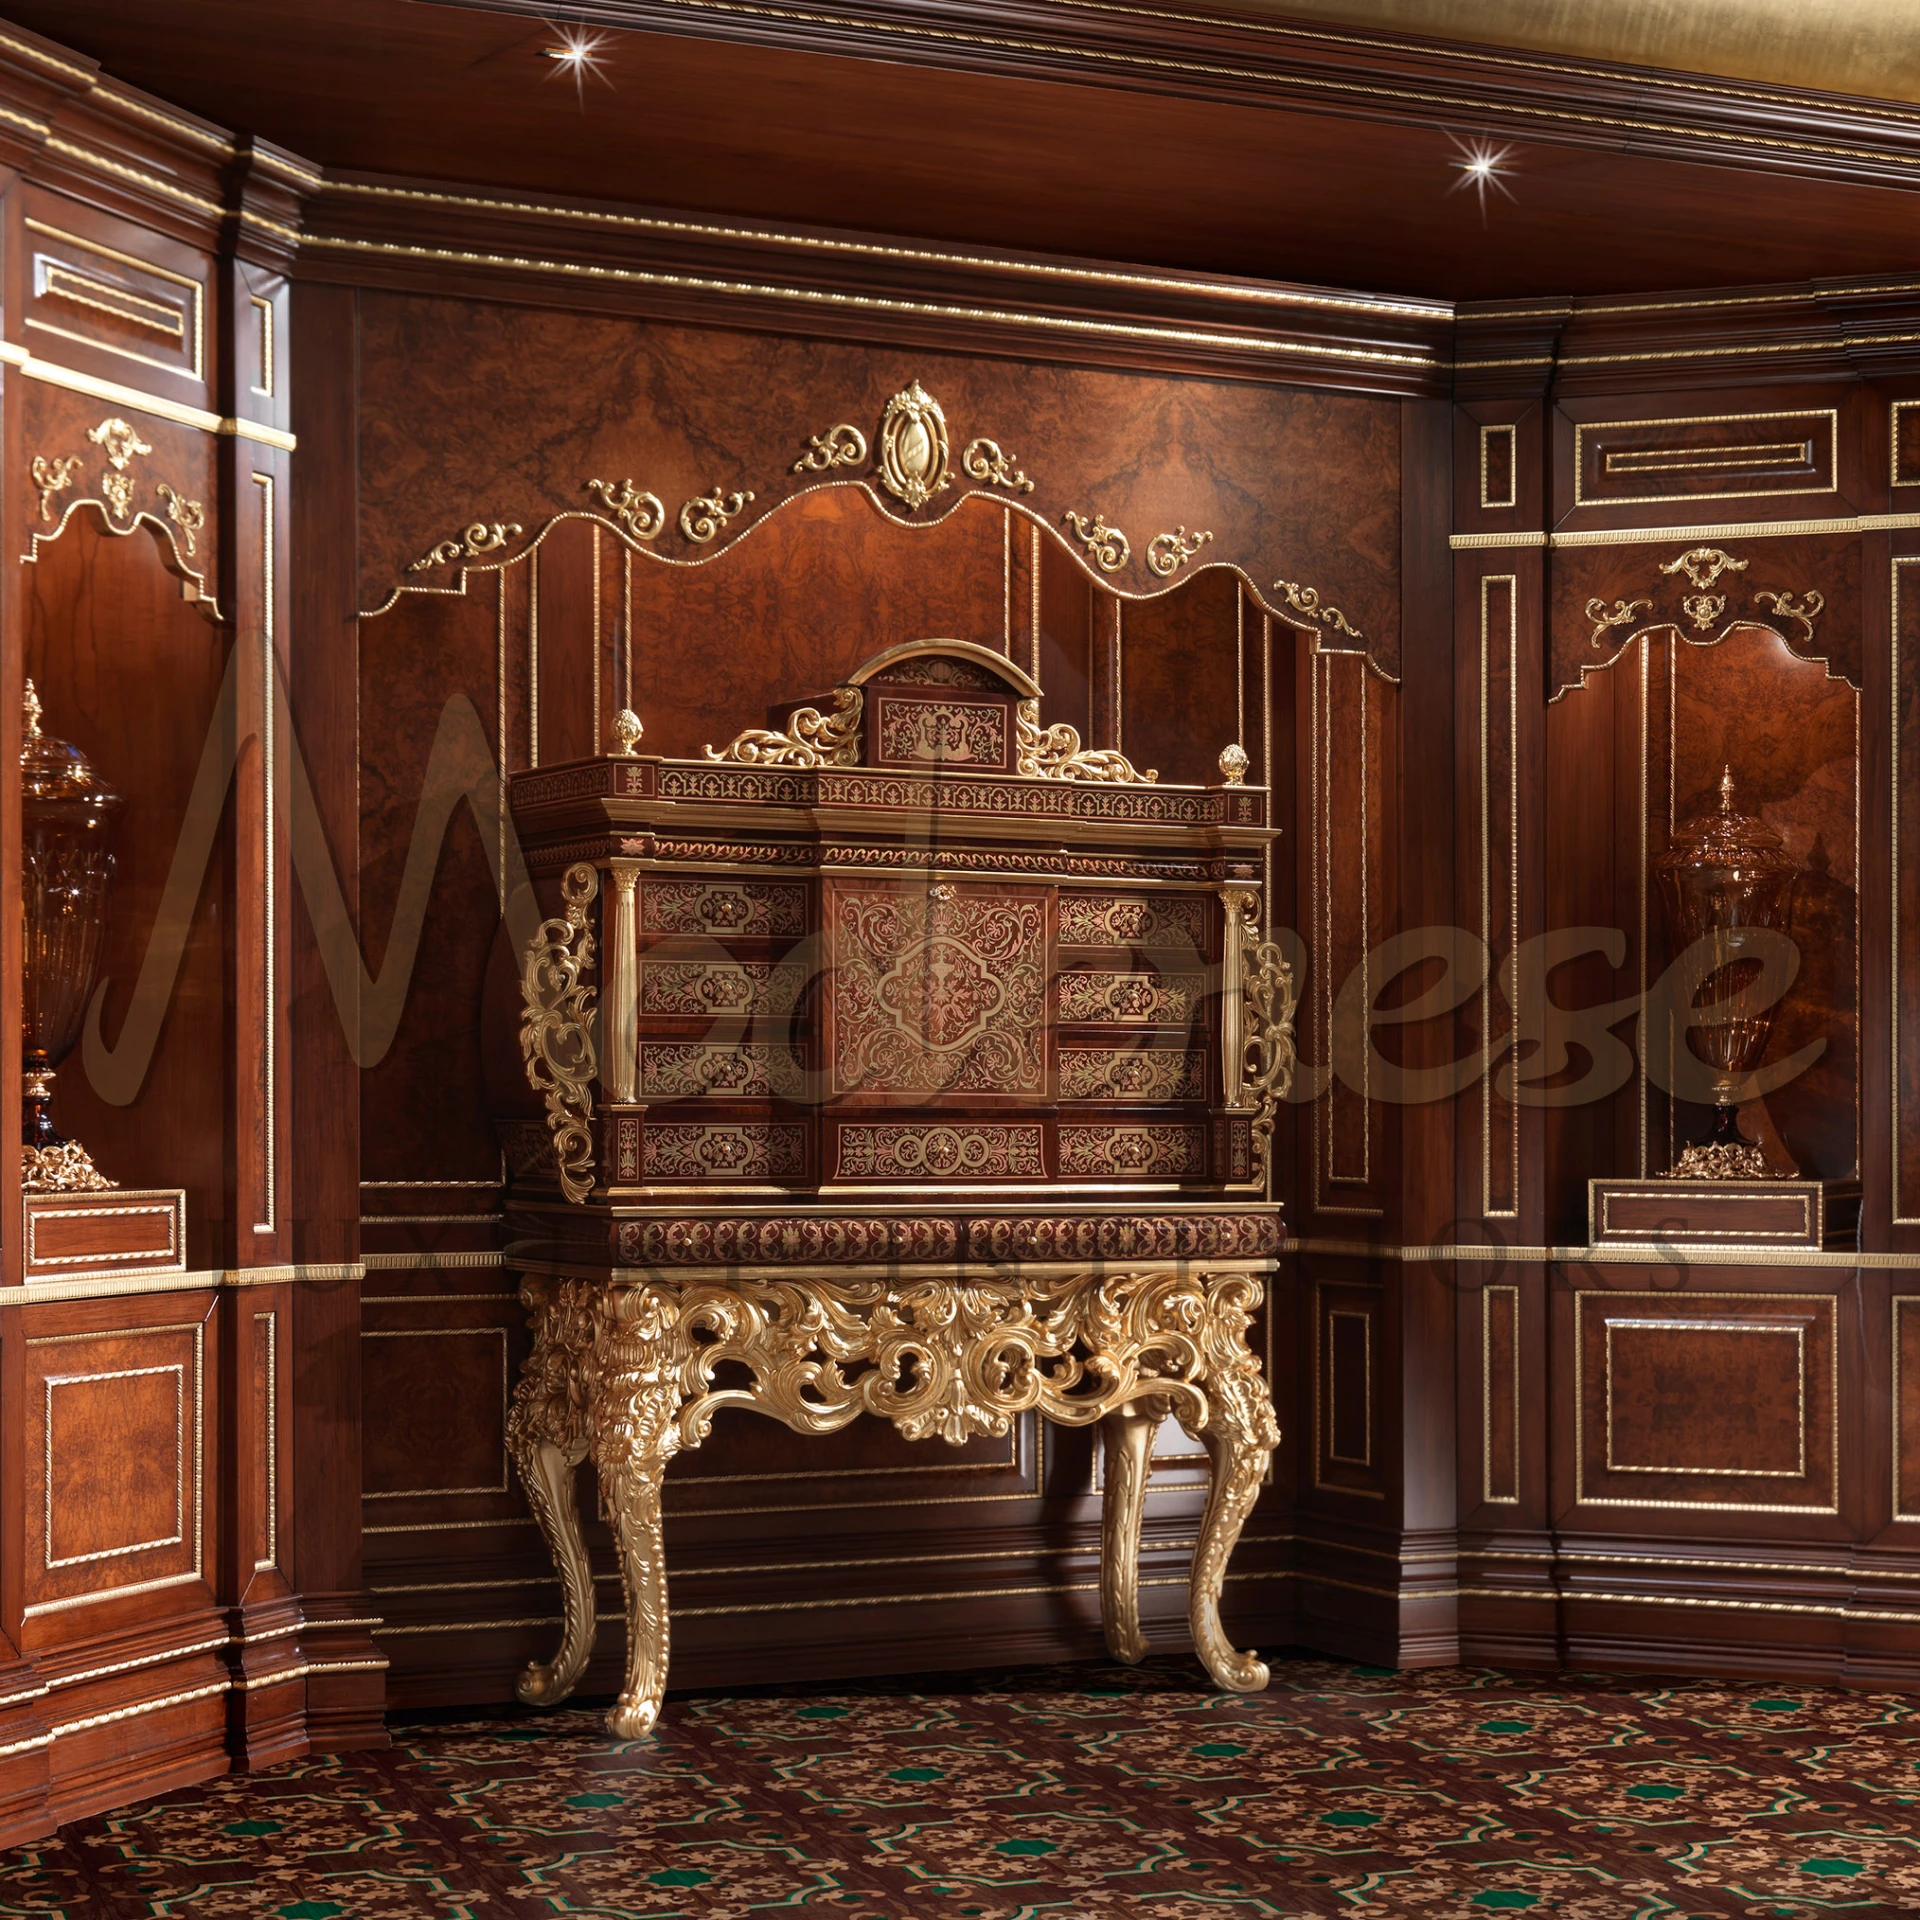 Experience the pinnacle of luxury with a solid wood, hand-carved cigar cabinet from Modenese. Gold leaf squiggles and walnut finish enhance its grandeur.